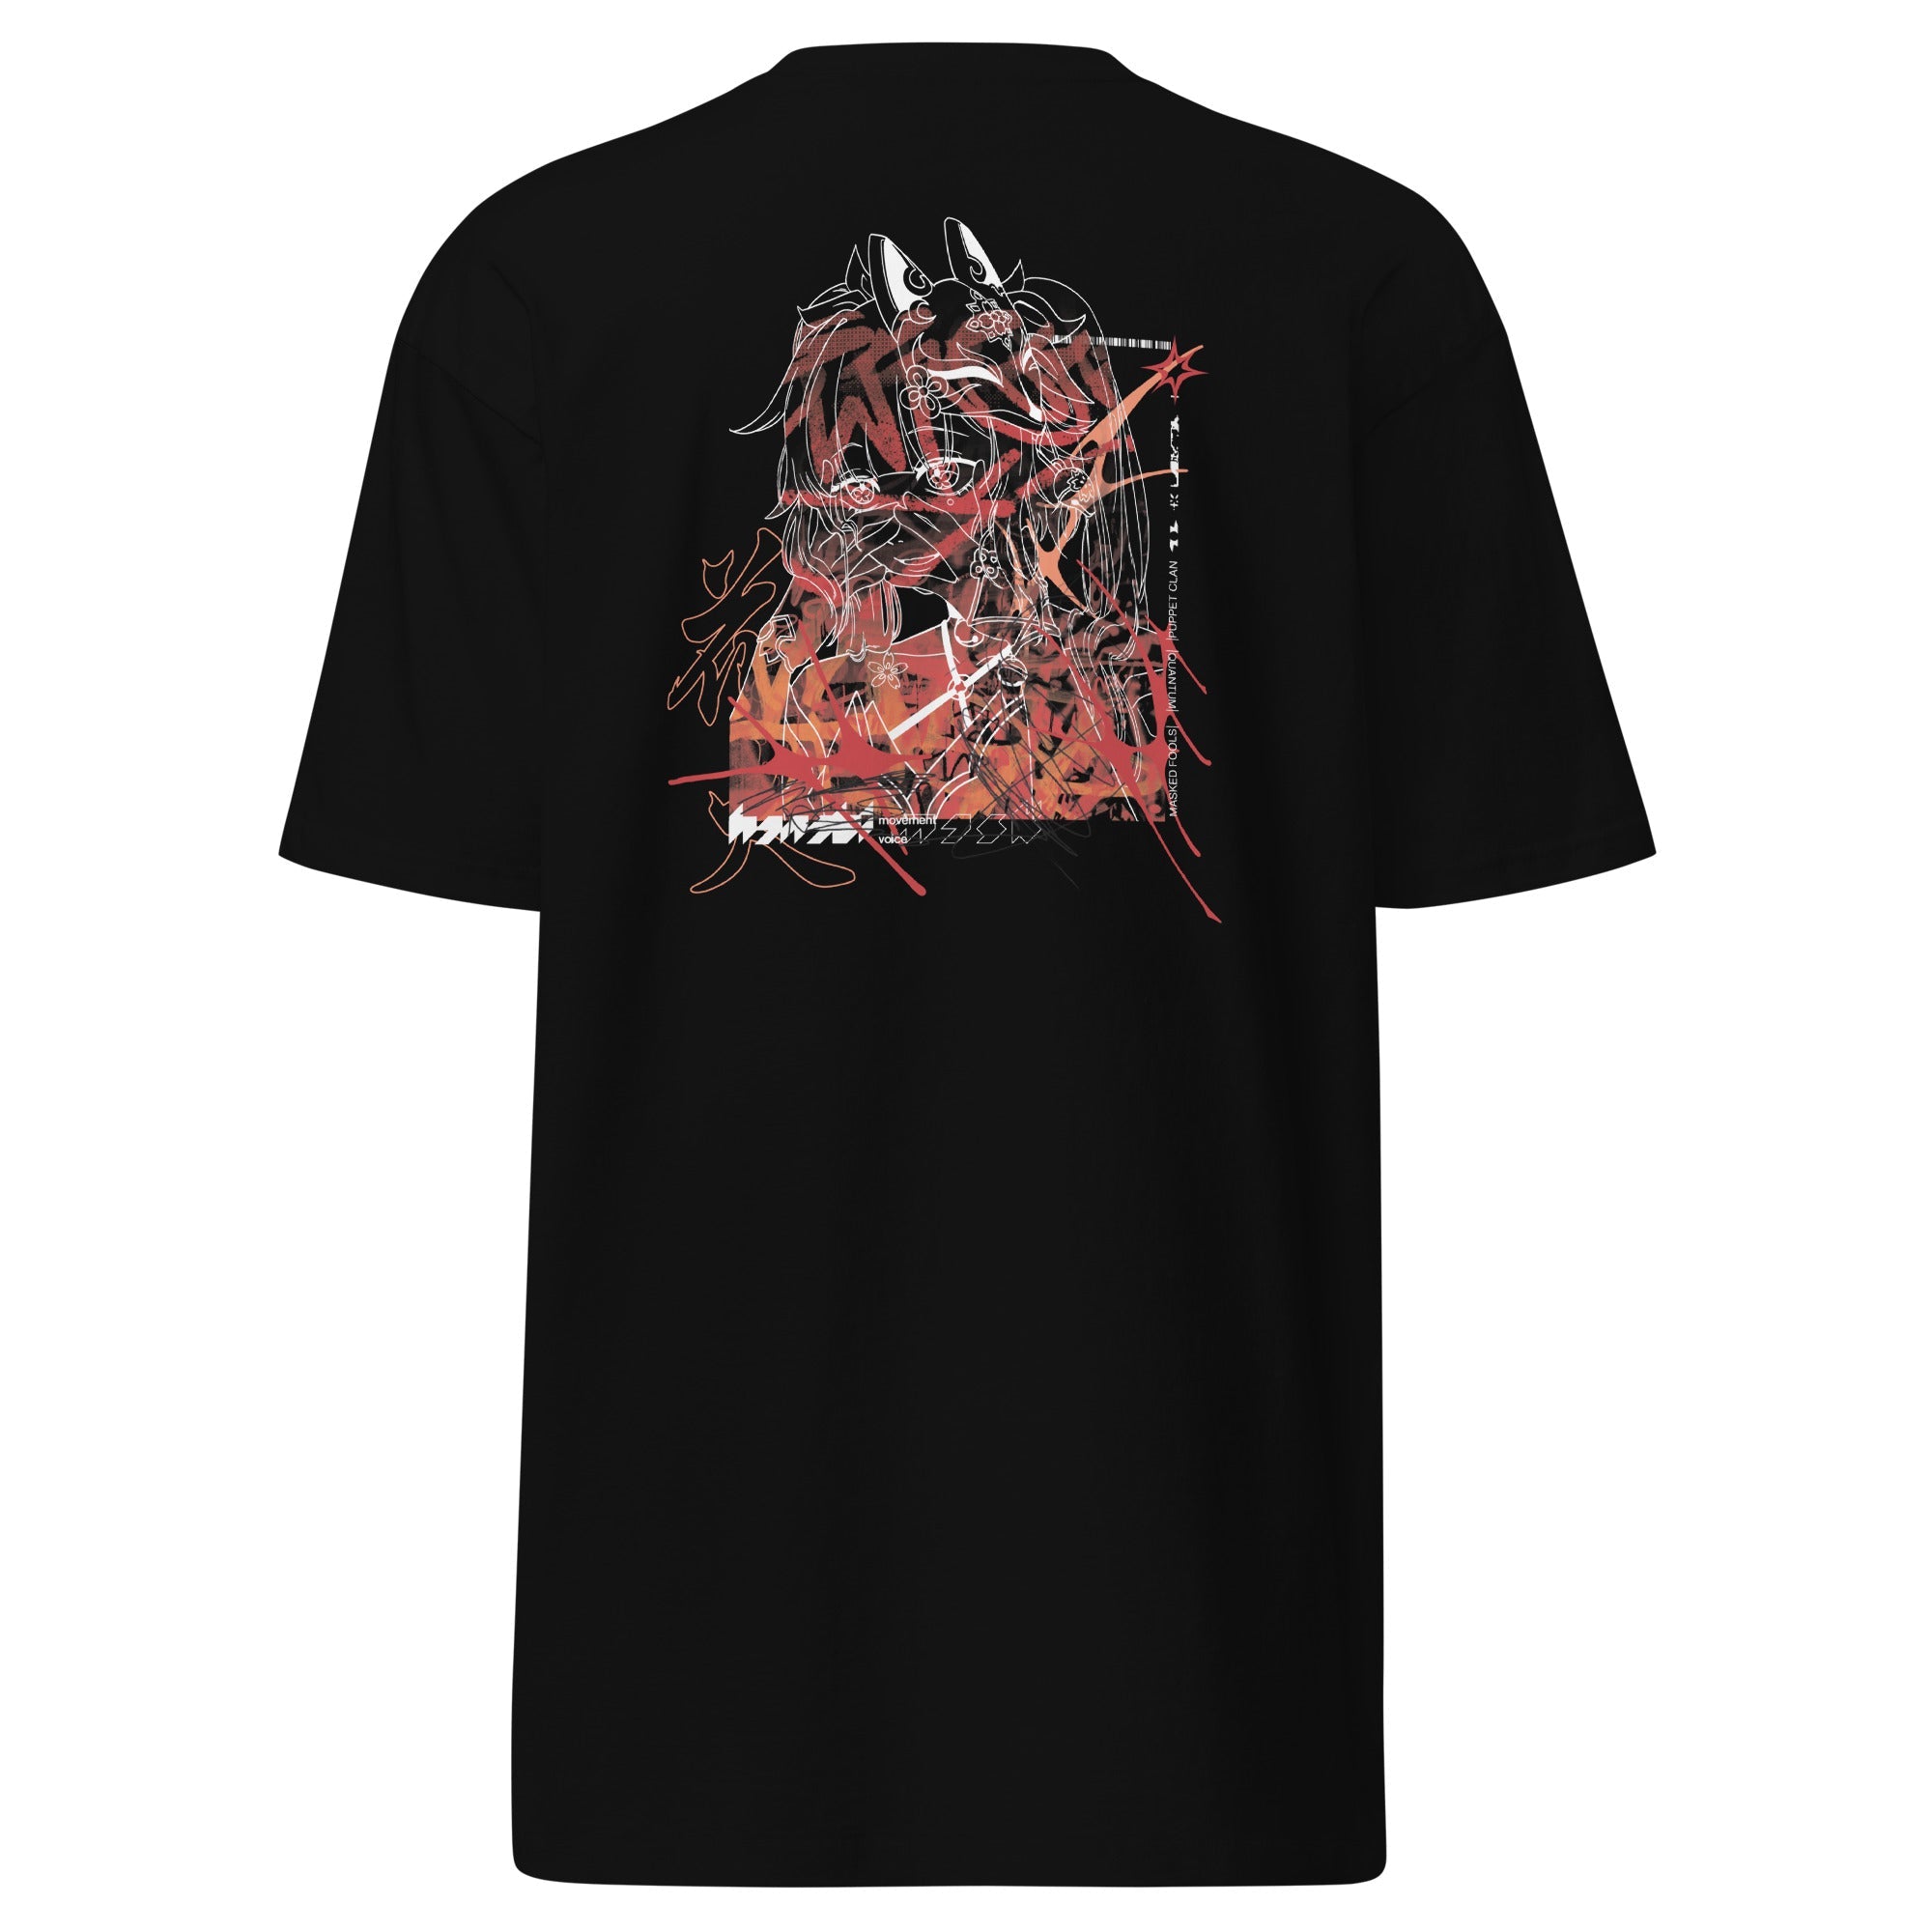 Sparkle t-shirt in black with a unique design from Honkai Star Rail, crafted for durability and comfort.